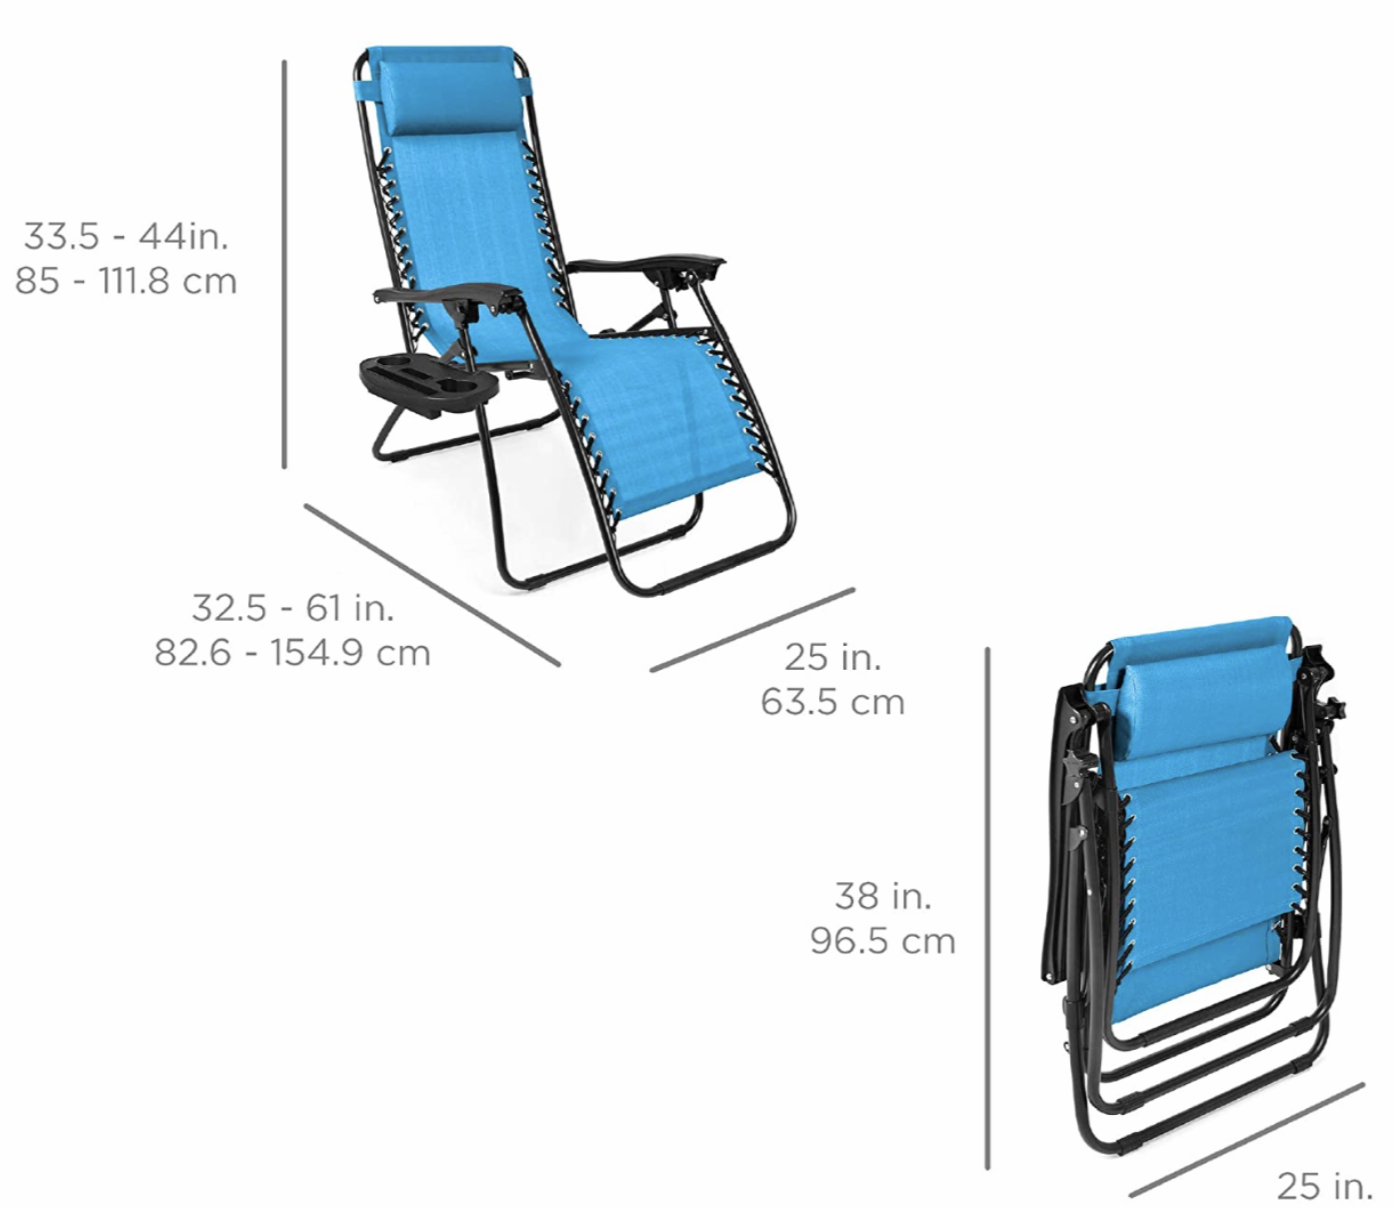 Copy of Set of two adjustable zero gravity lounge Chair Recliners for Patio, Pool w/Cup Holders -